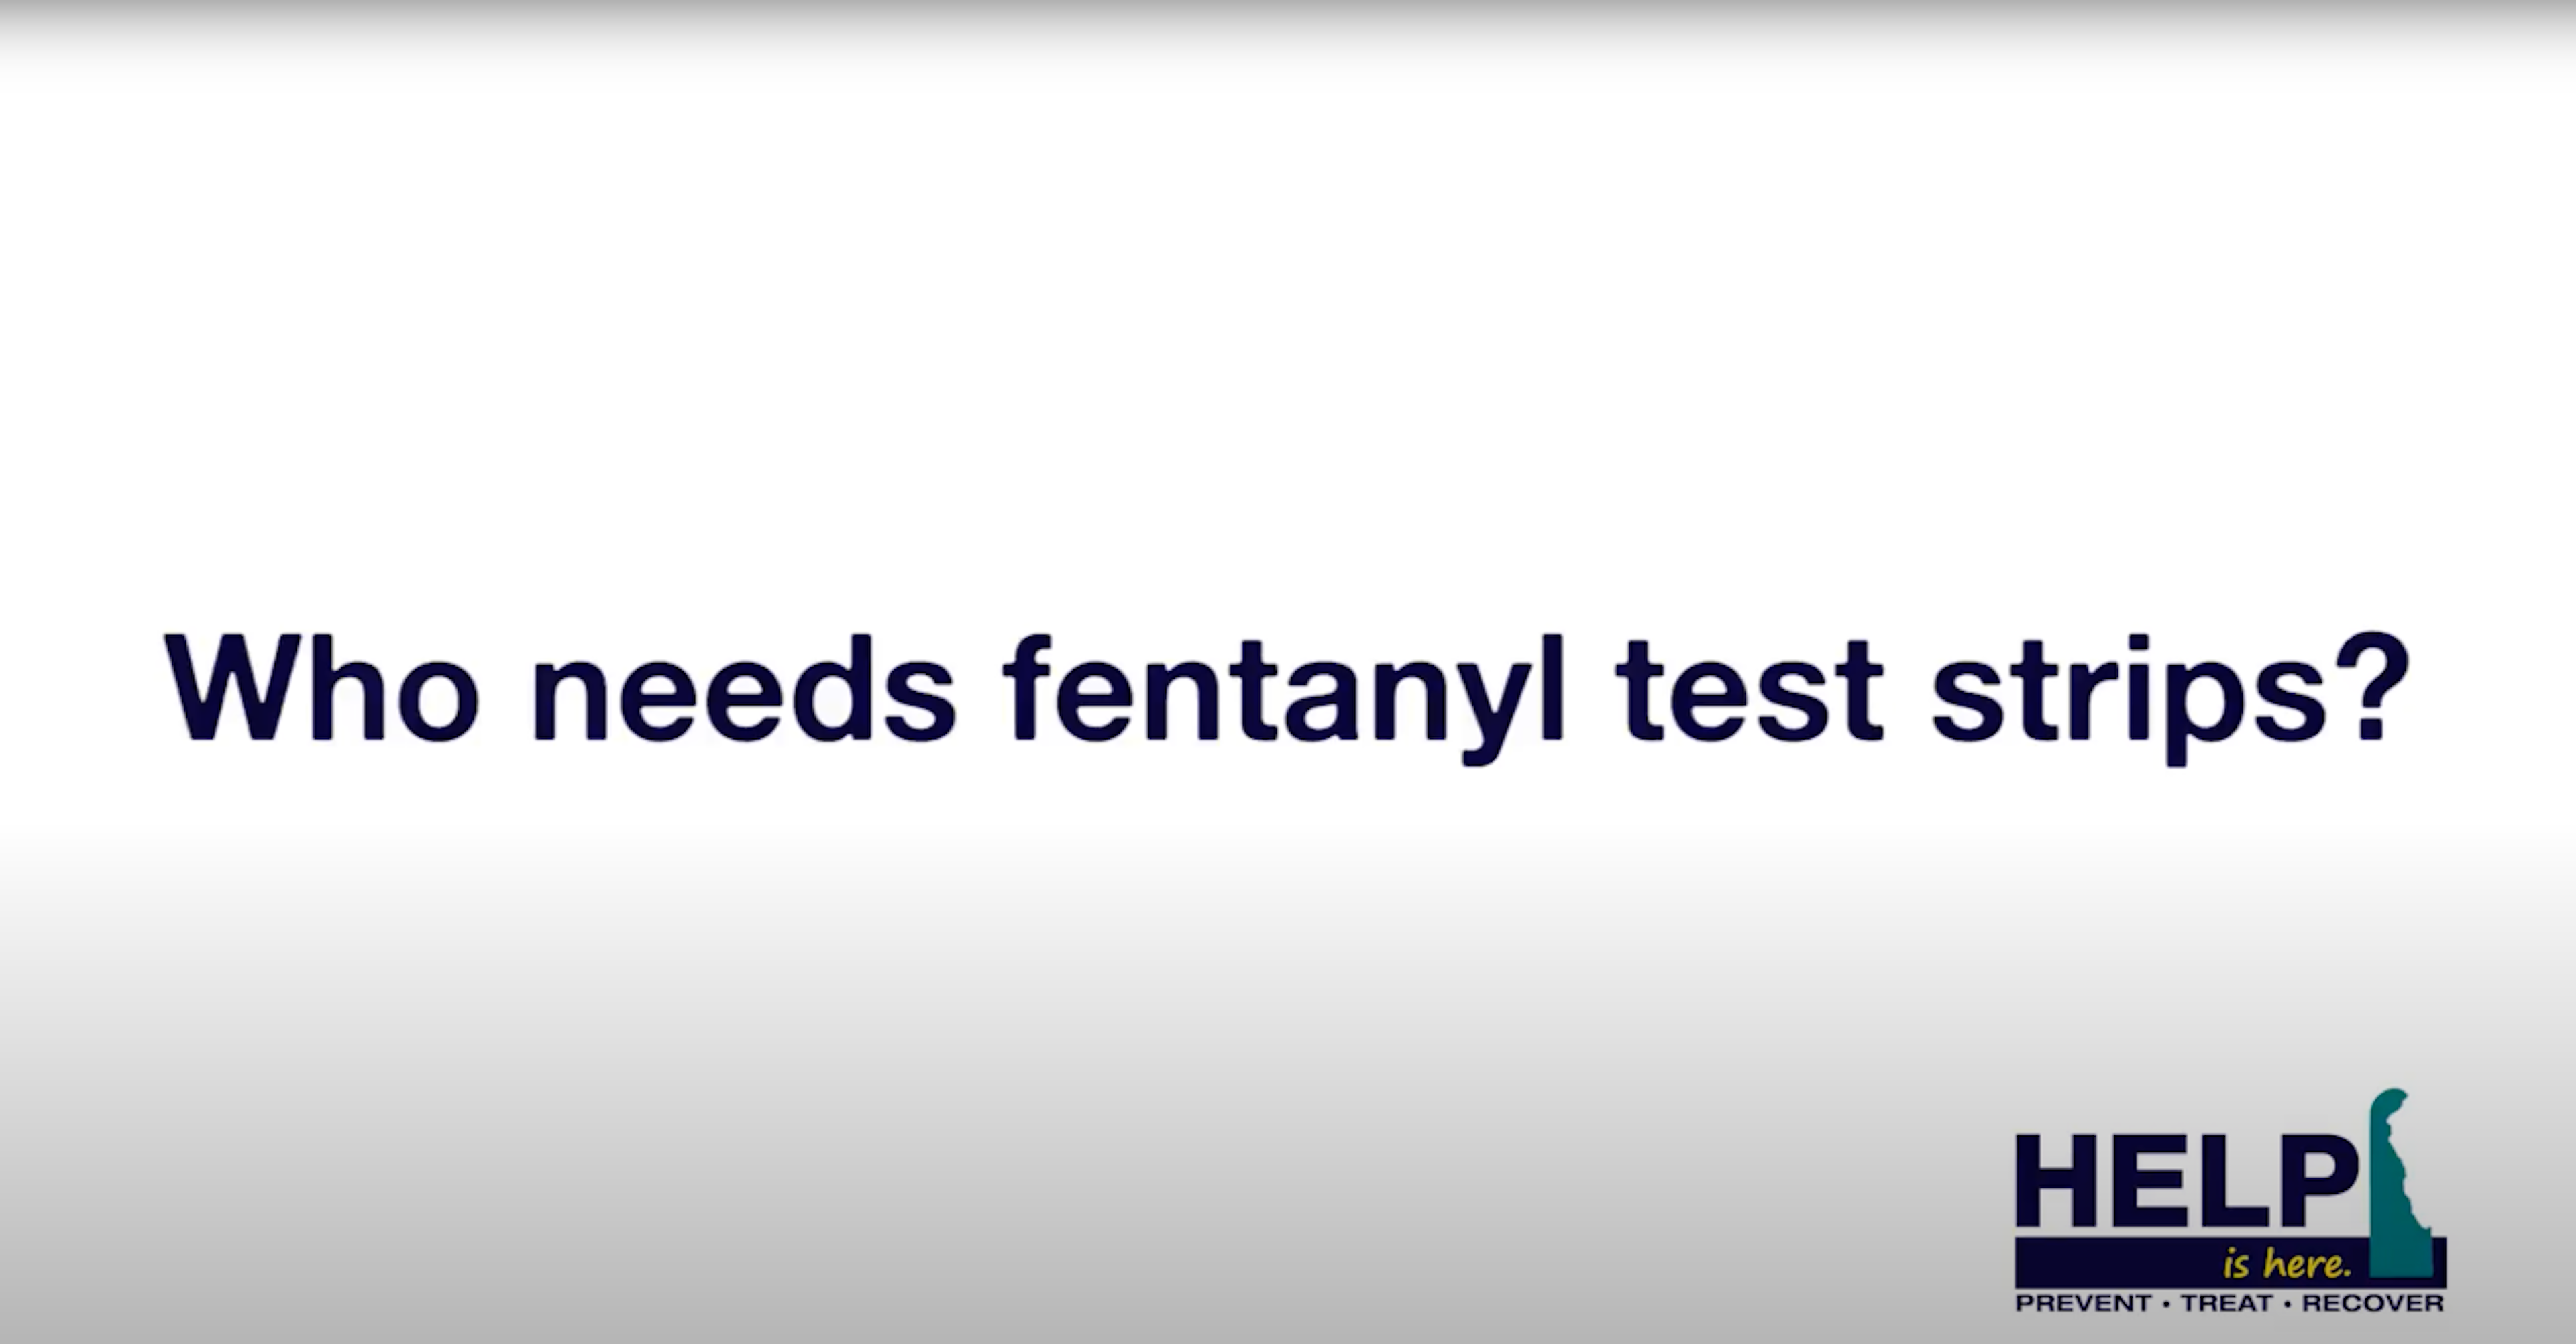 Who needs fentanyl test strips?